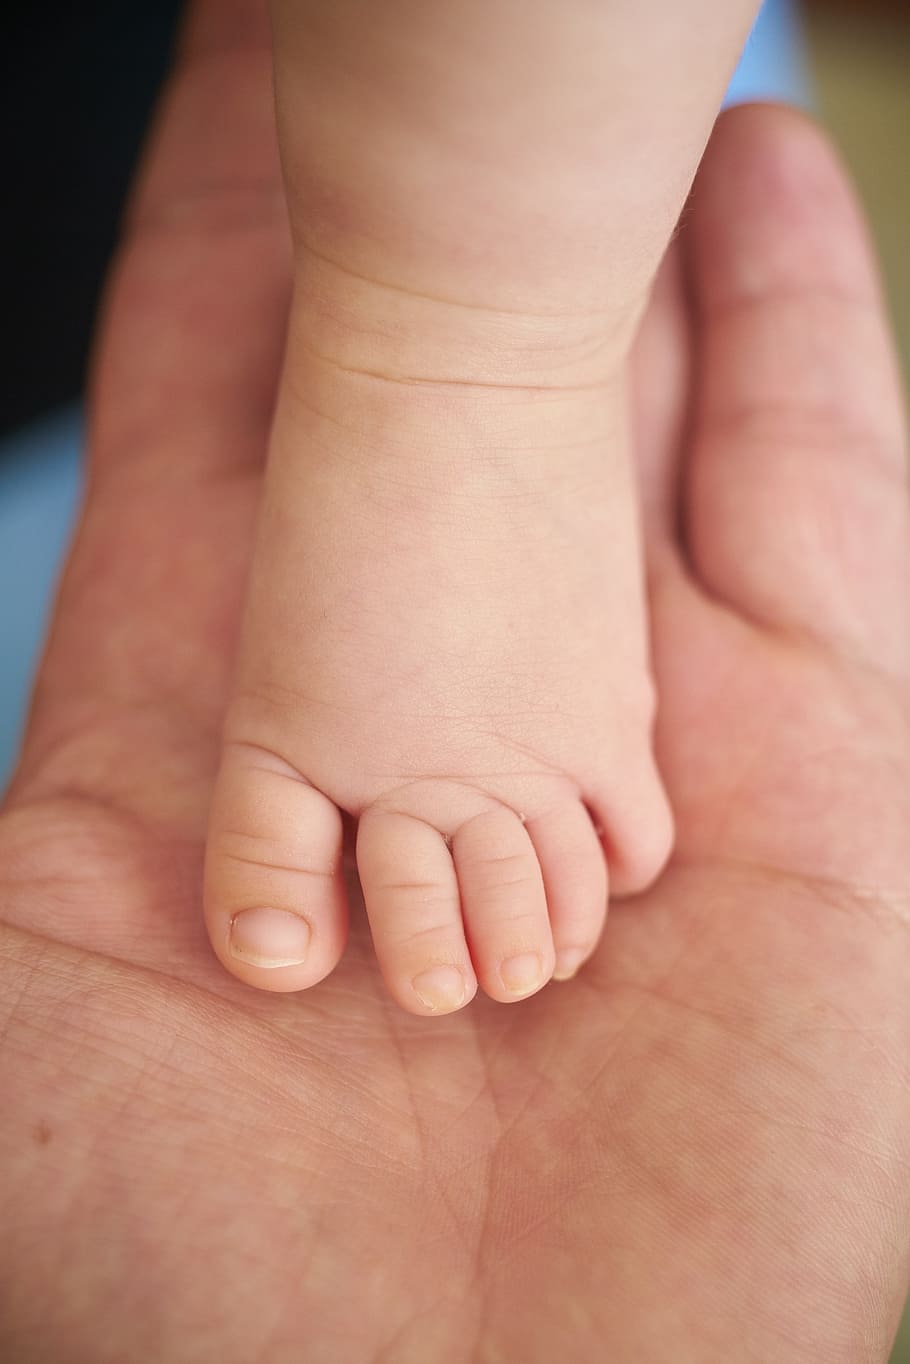 baby, left, foot, person, palm, child, little, the innocence, babies, bamo